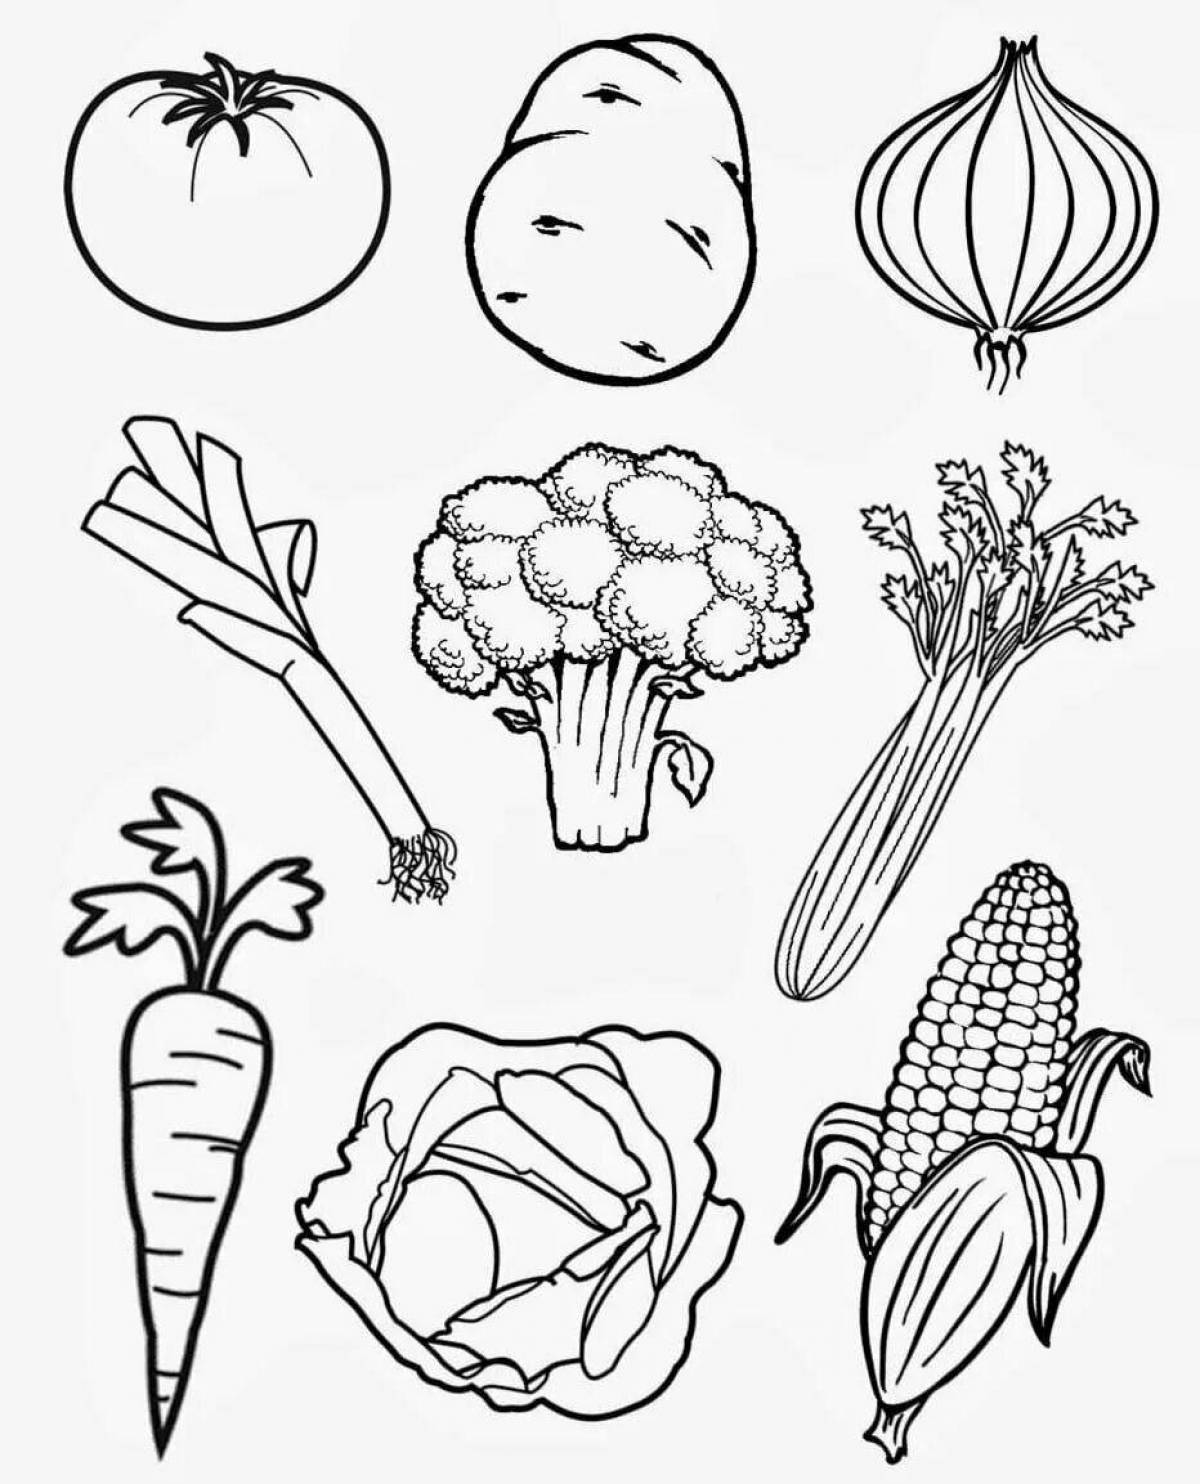 Entertaining coloring of vegetables for children 3 years old